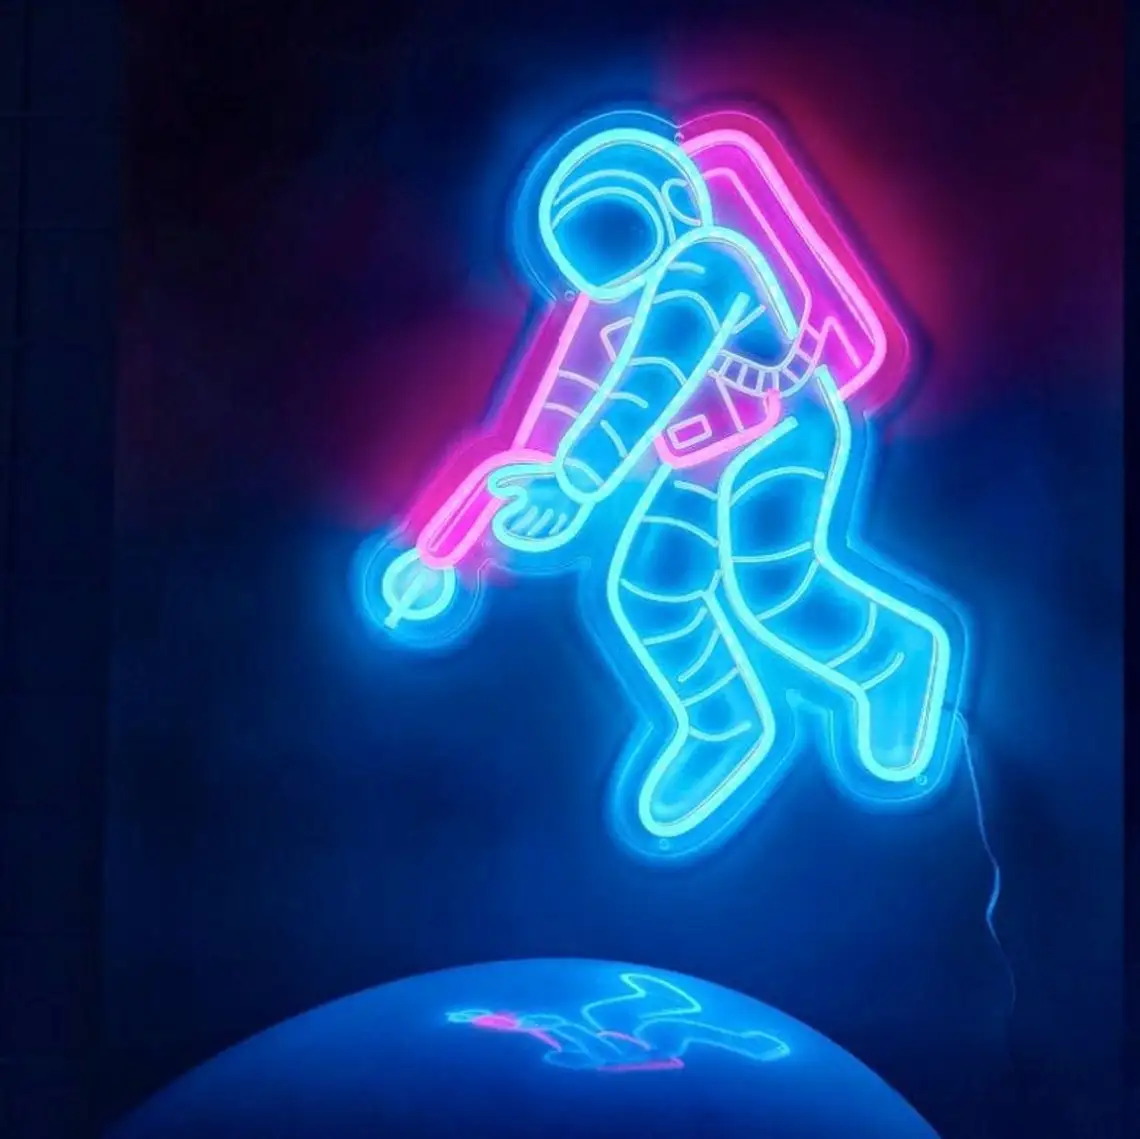 Astronaut Neon Signs Neon Light, Space Neon Light Personalized Neon Sign Alien for Bedroom, Party Game, Neon Sign Gaming